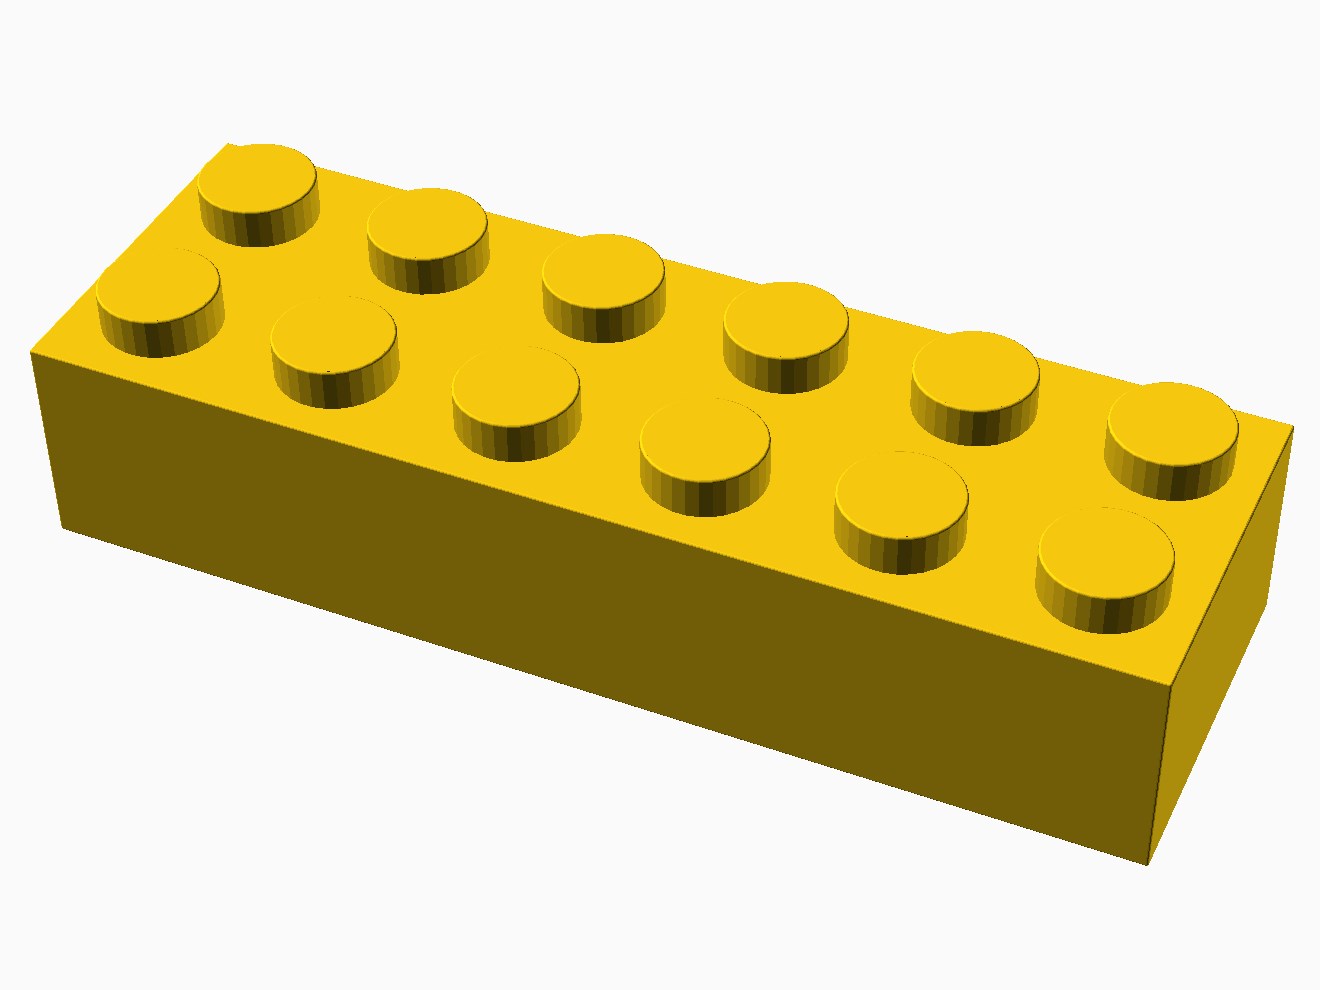 3D printable model of a LEGO 6x2 Brick with standard knobs.